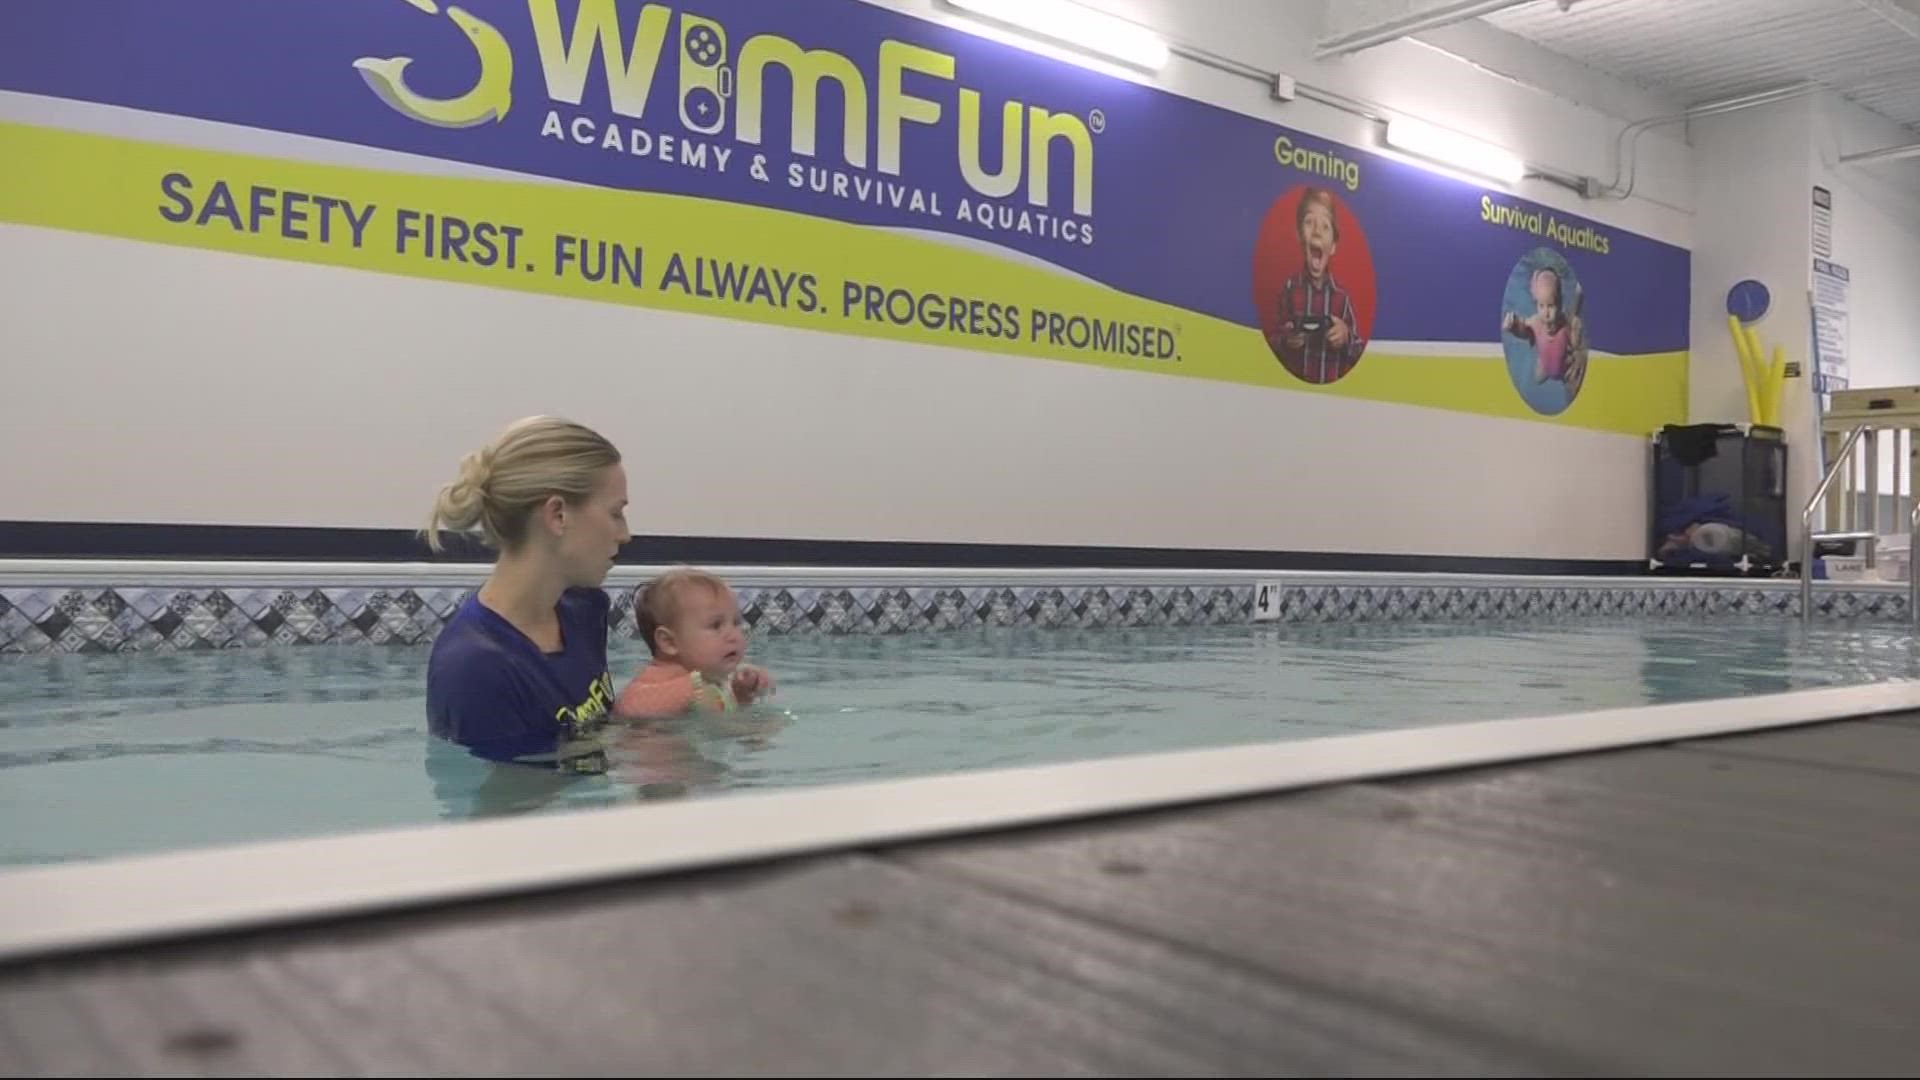 SwimFun Academy hopes to teach kids to swim as well as help them socialize, learn and make friends.